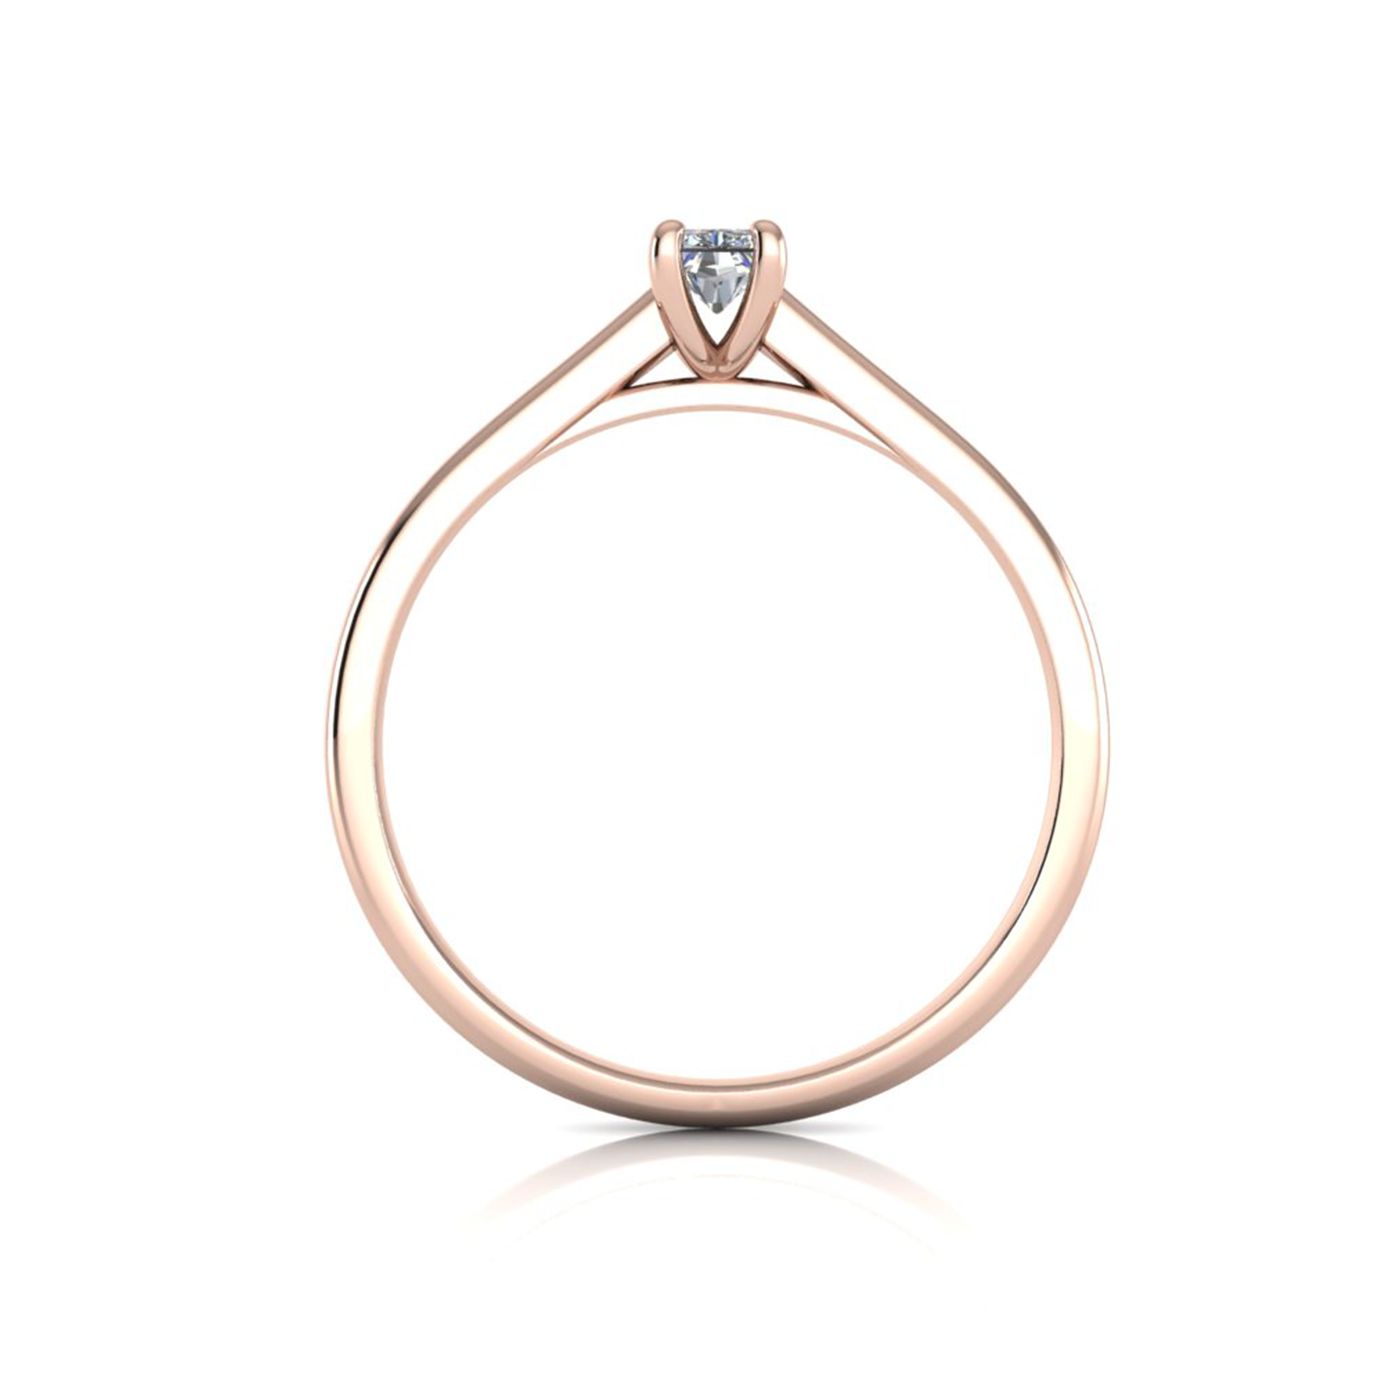 18k rose gold  0,30 ct 4 prongs solitaire radiant cut diamond engagement ring with whisper thin band